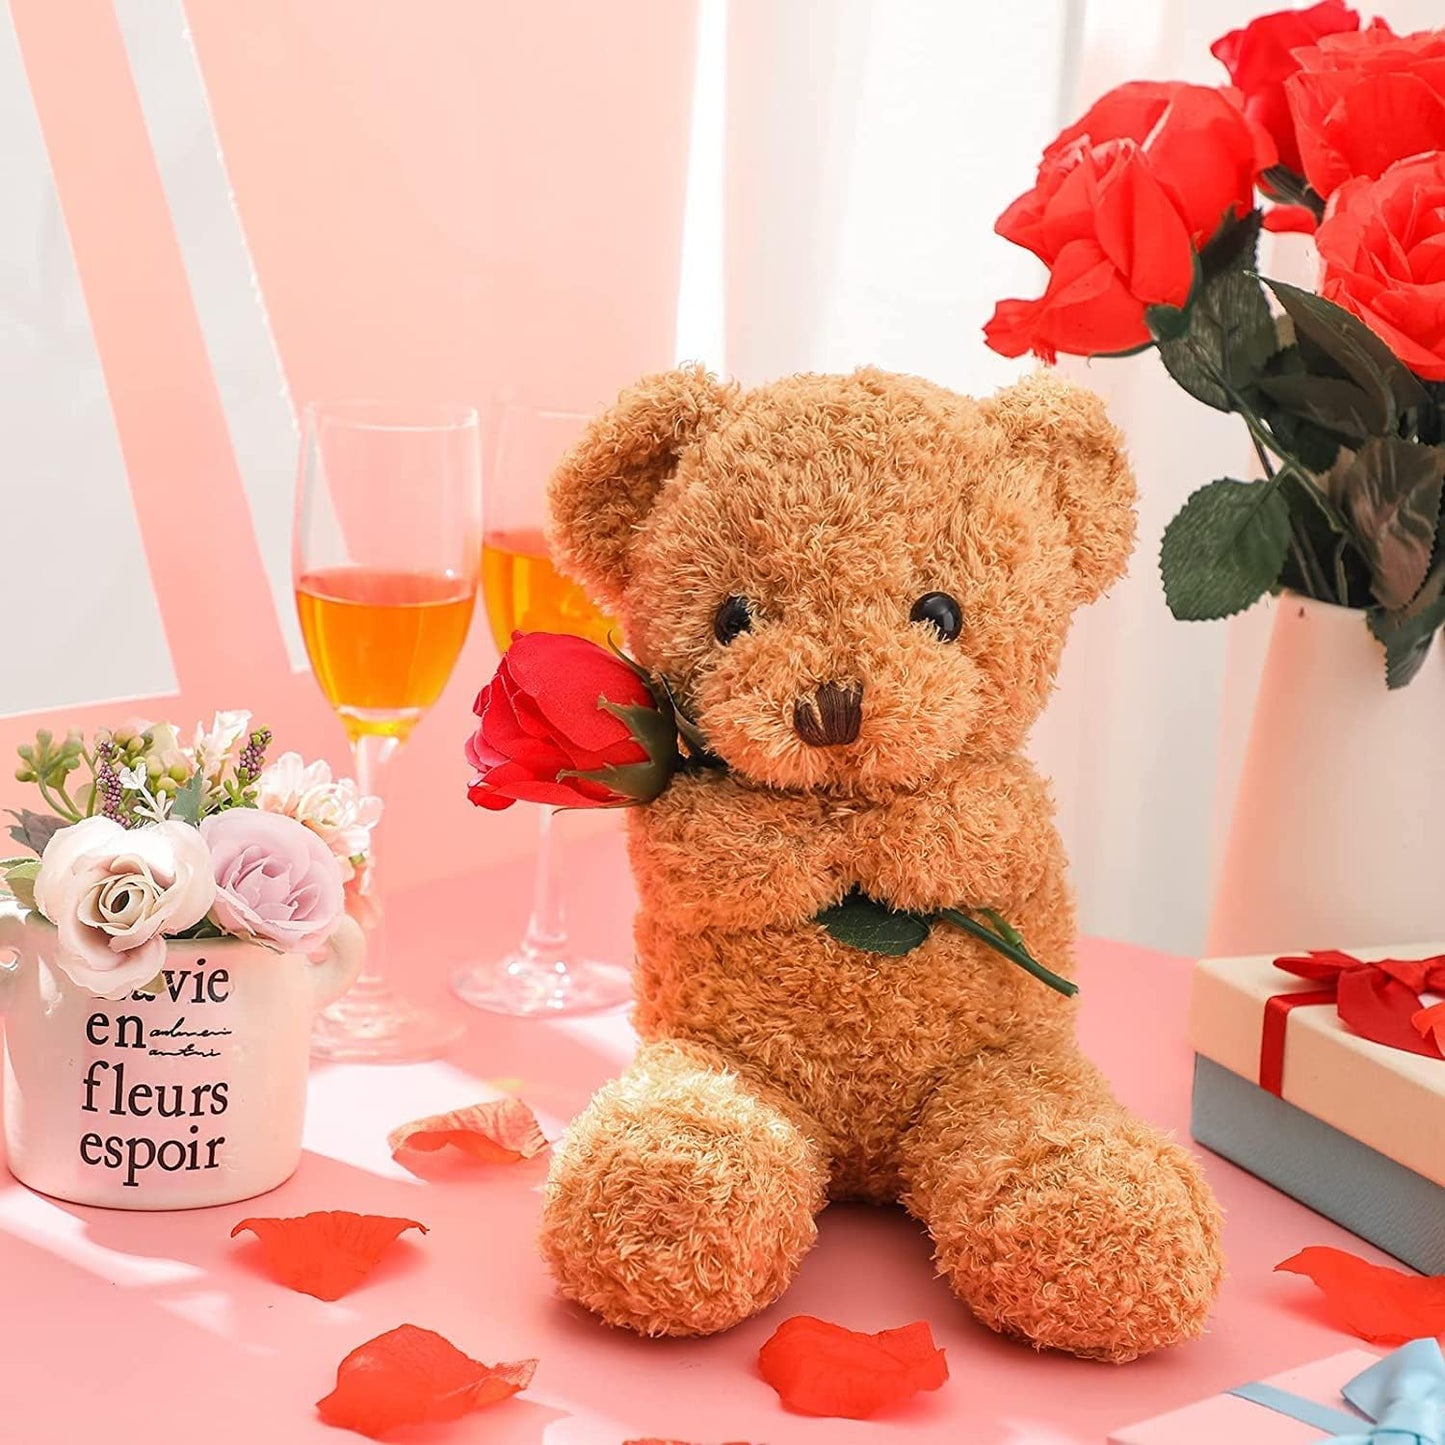 Plush Stuffed Animal Bear with Rose Funny Cute Stuffed Animal Plush Valentine's Day Gifts for Kids Toddler Girlfriend Mother's Day, 11.8 Inches (Brown)